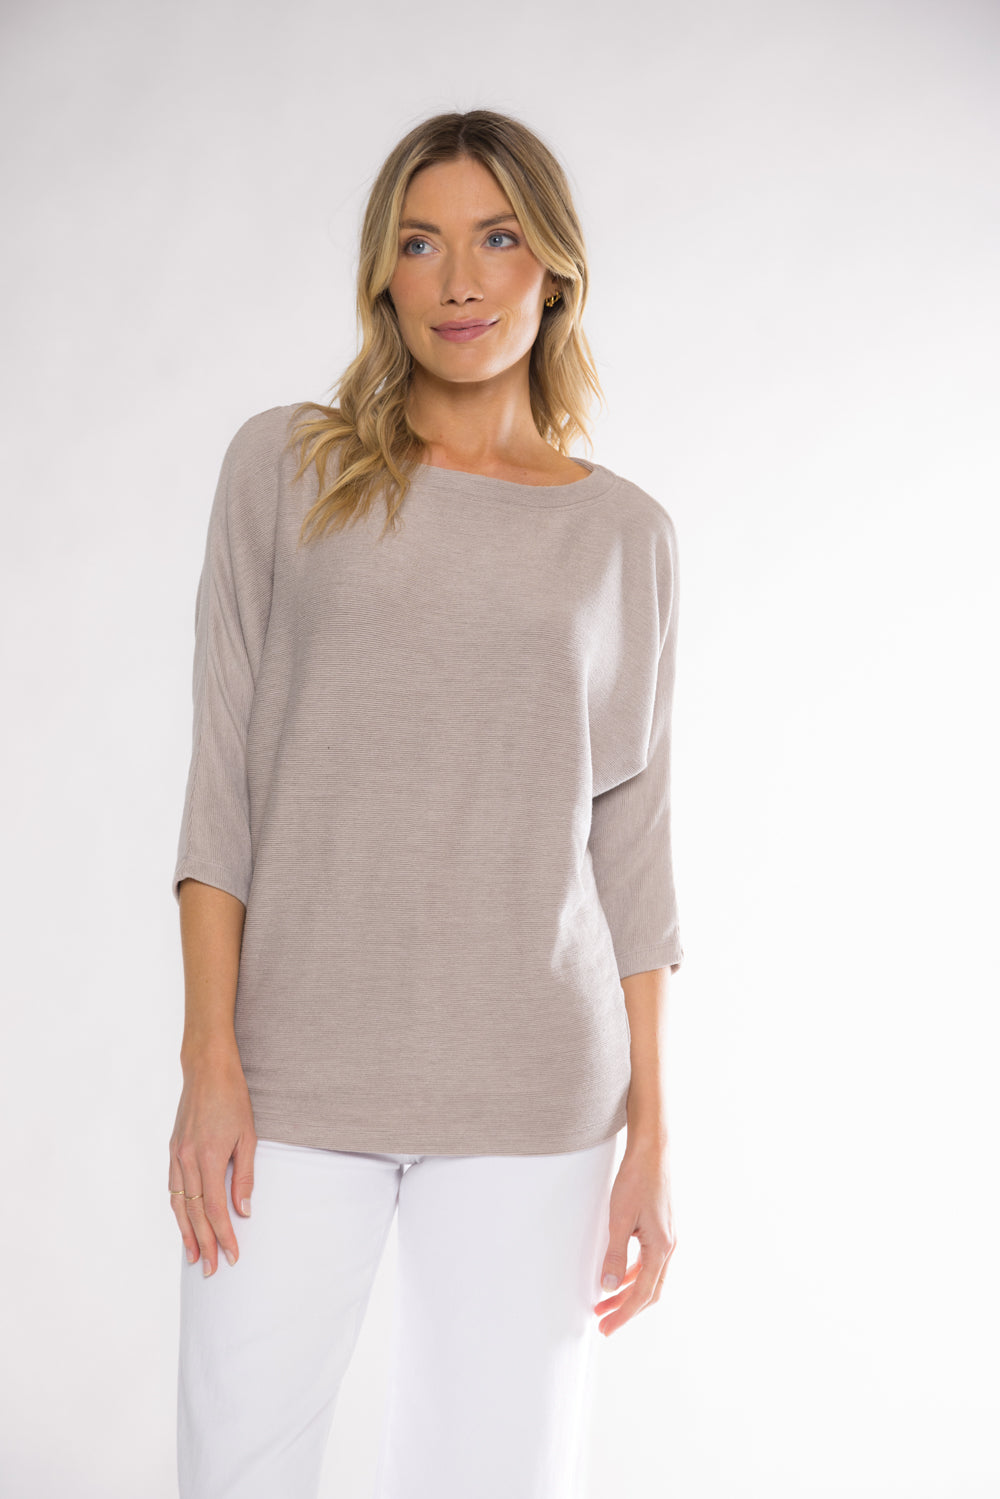 DAPHNE BOAT NECK TOP - TAUPE